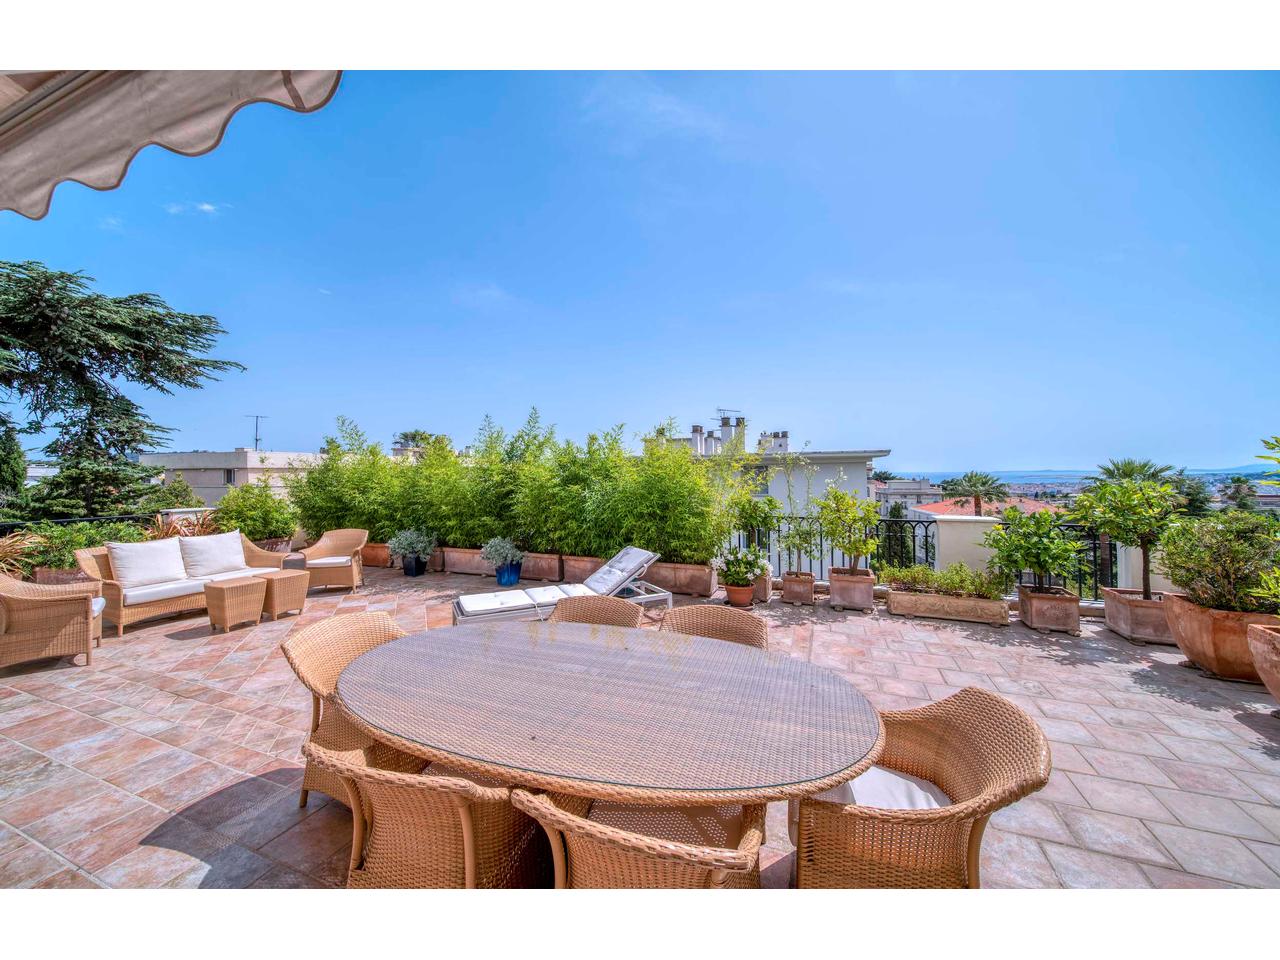 Nice Riviera - Agence Immobiliére Nice Côte d'Azur | NICE CIMIEZ - EXCEPTIONAL APARTMENT WITH 90M2 TERRACE IN HISTORIC BUILDING